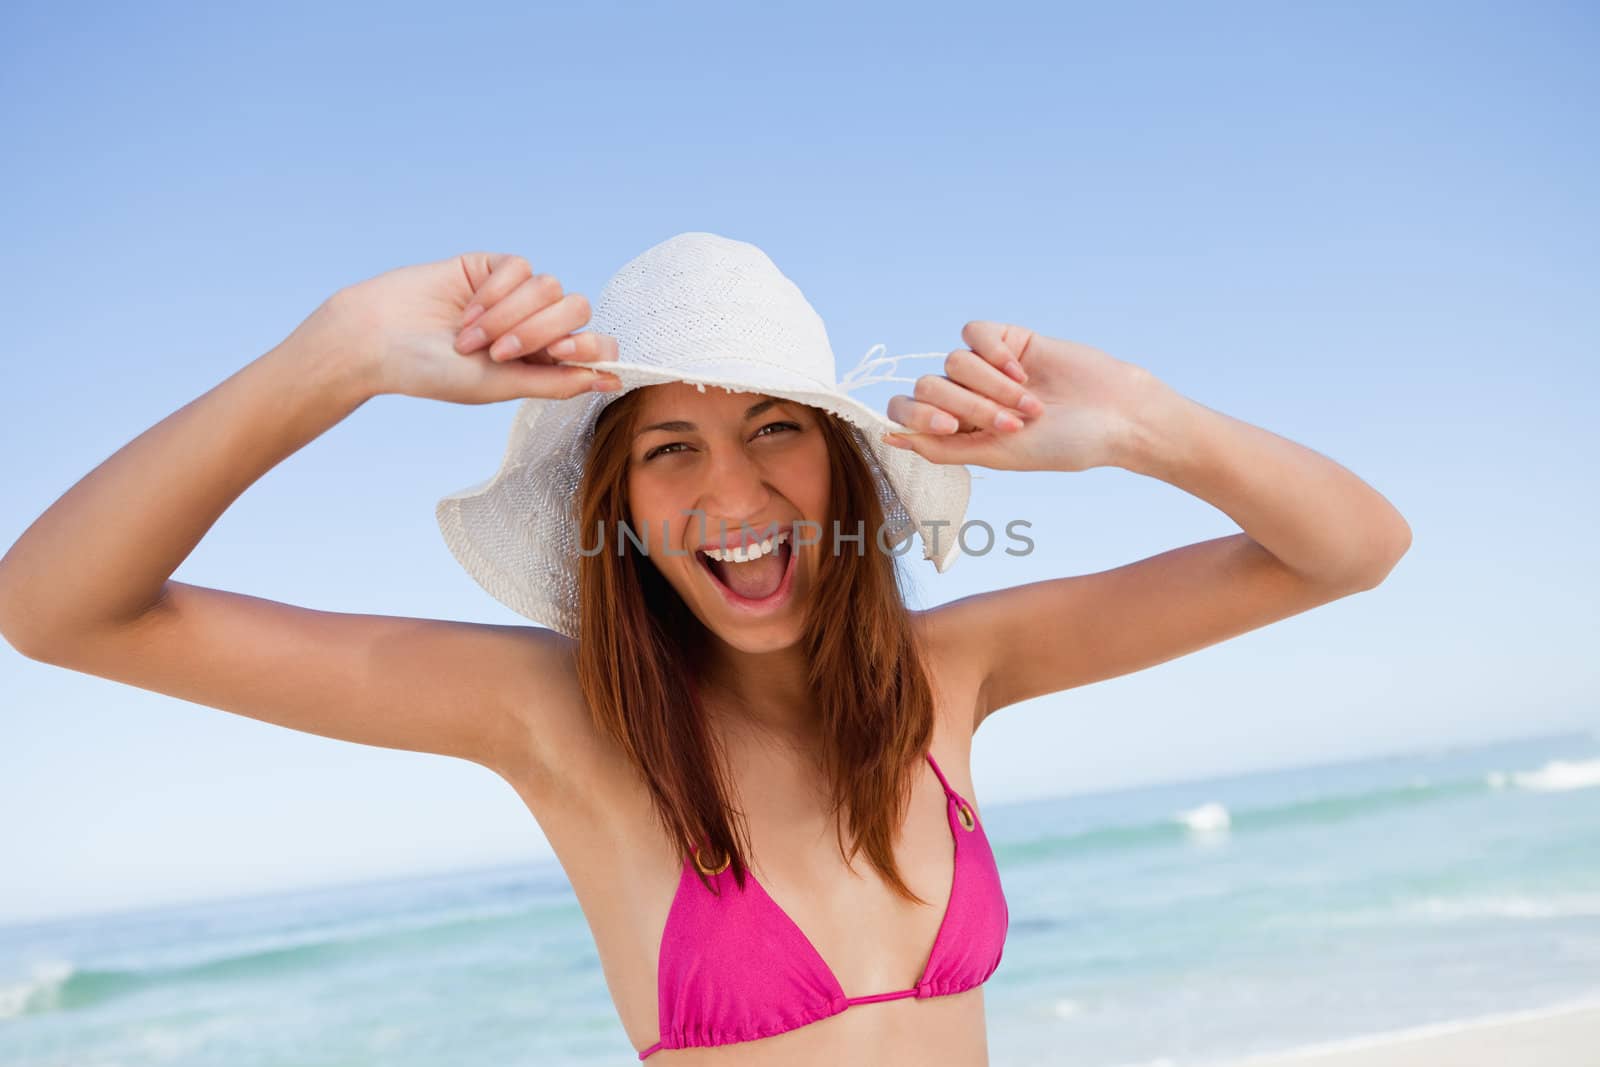 Young woman raising her arms in happiness in front of the sea by Wavebreakmedia